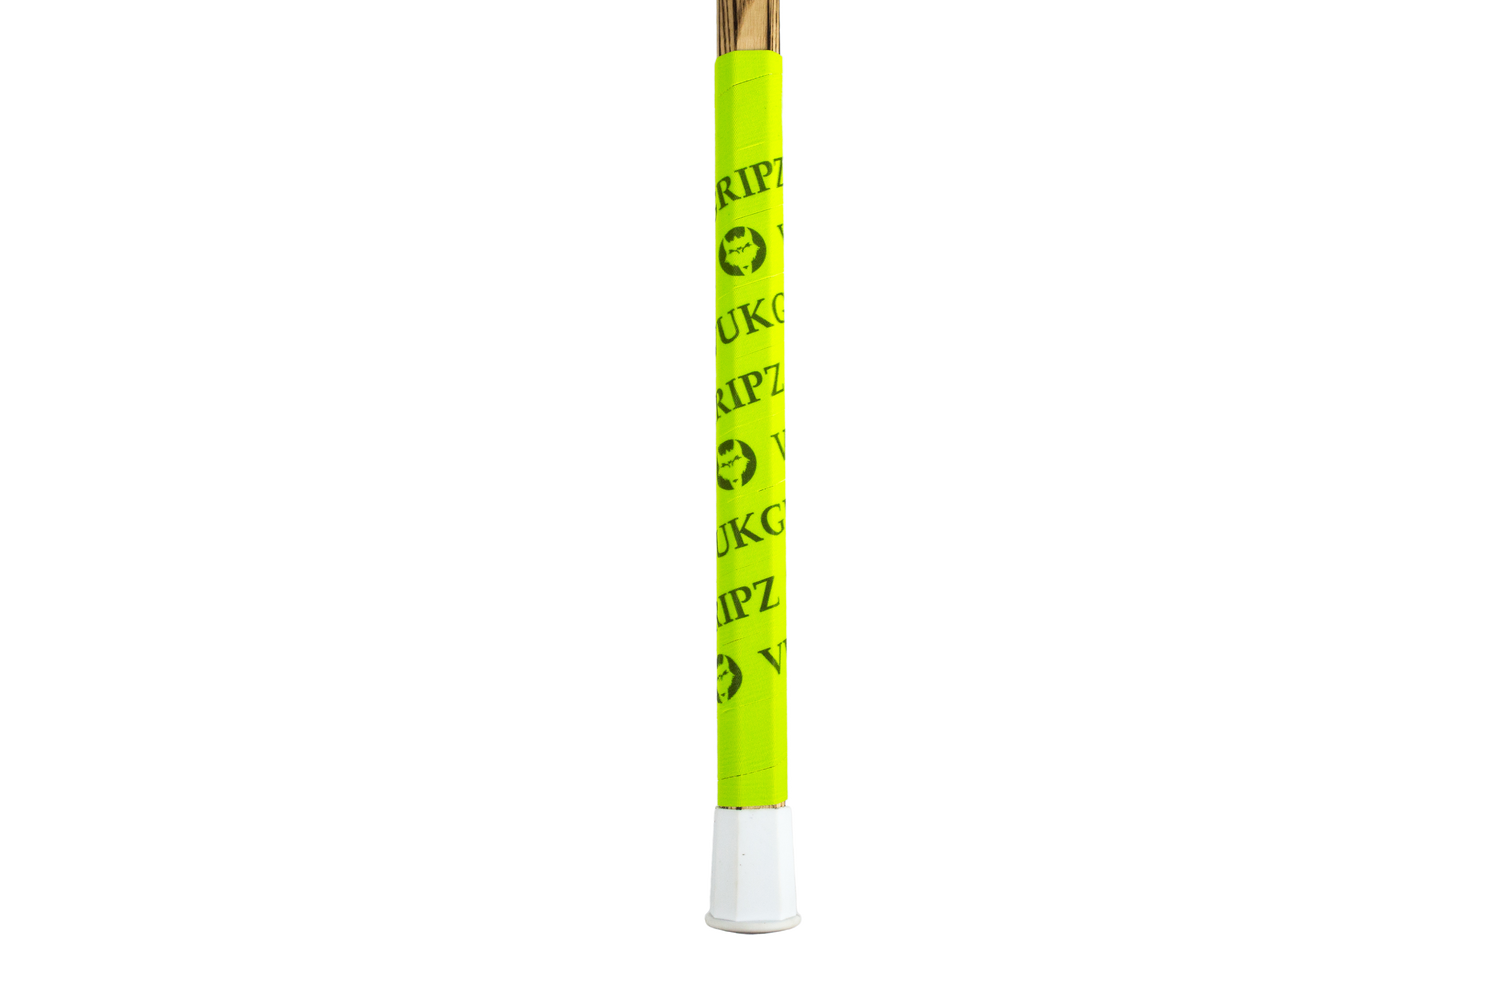 Neon Green Lacrosse Stick Tape is the Best Lacrosse Tape with Unmatched Slip Resistance